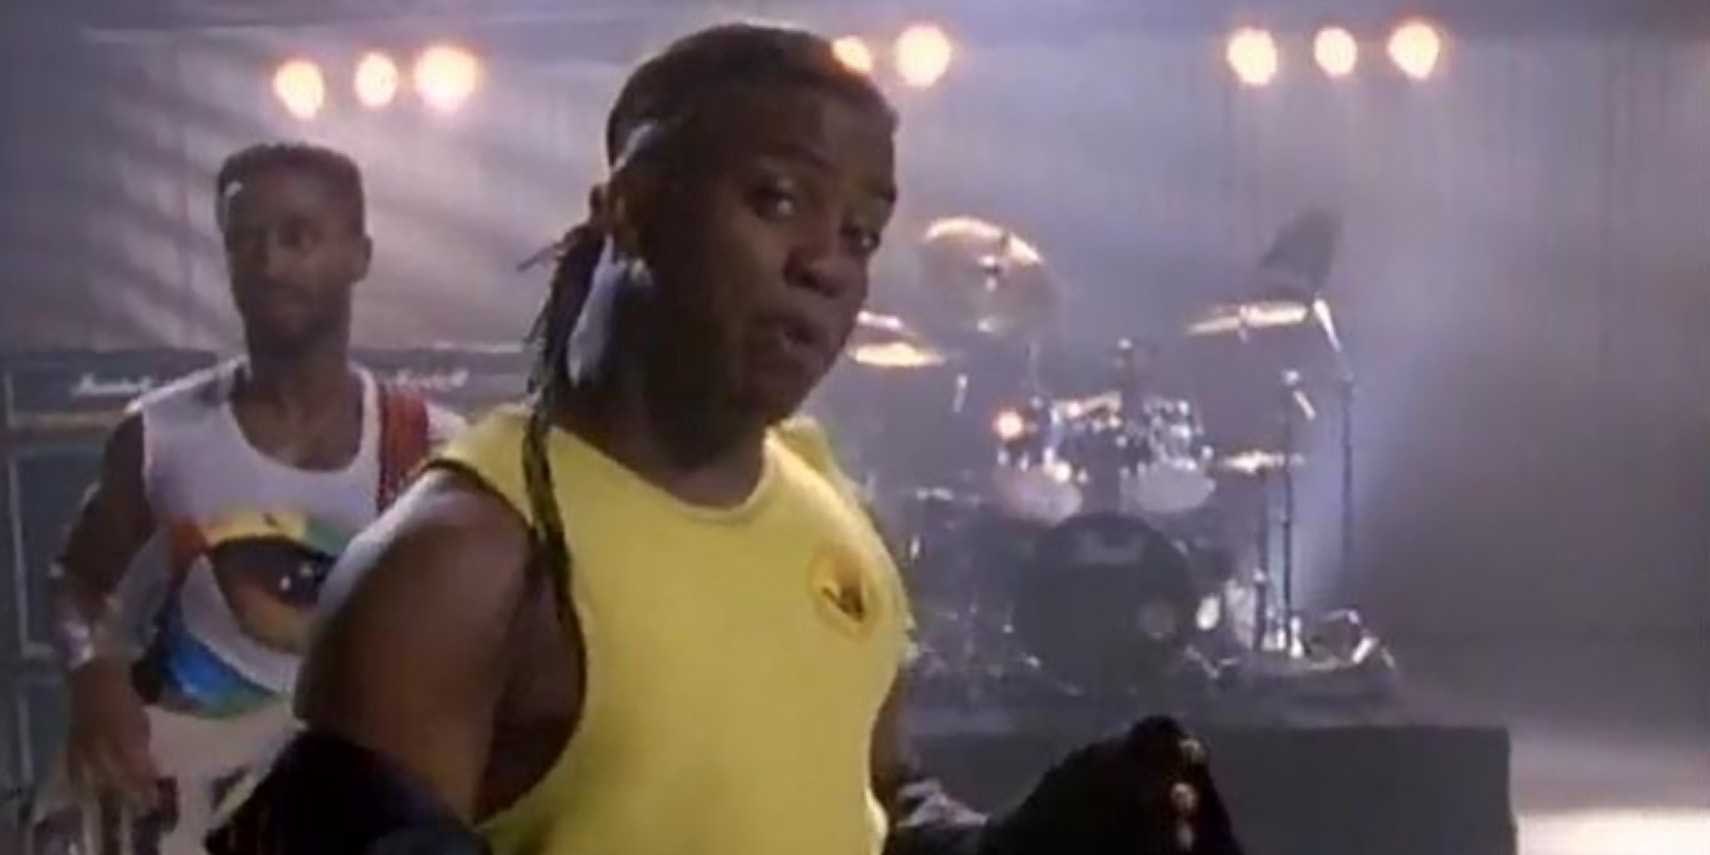 Man in yellow sleeveless tshirt sings into the camera in front of a drum set on a studio.